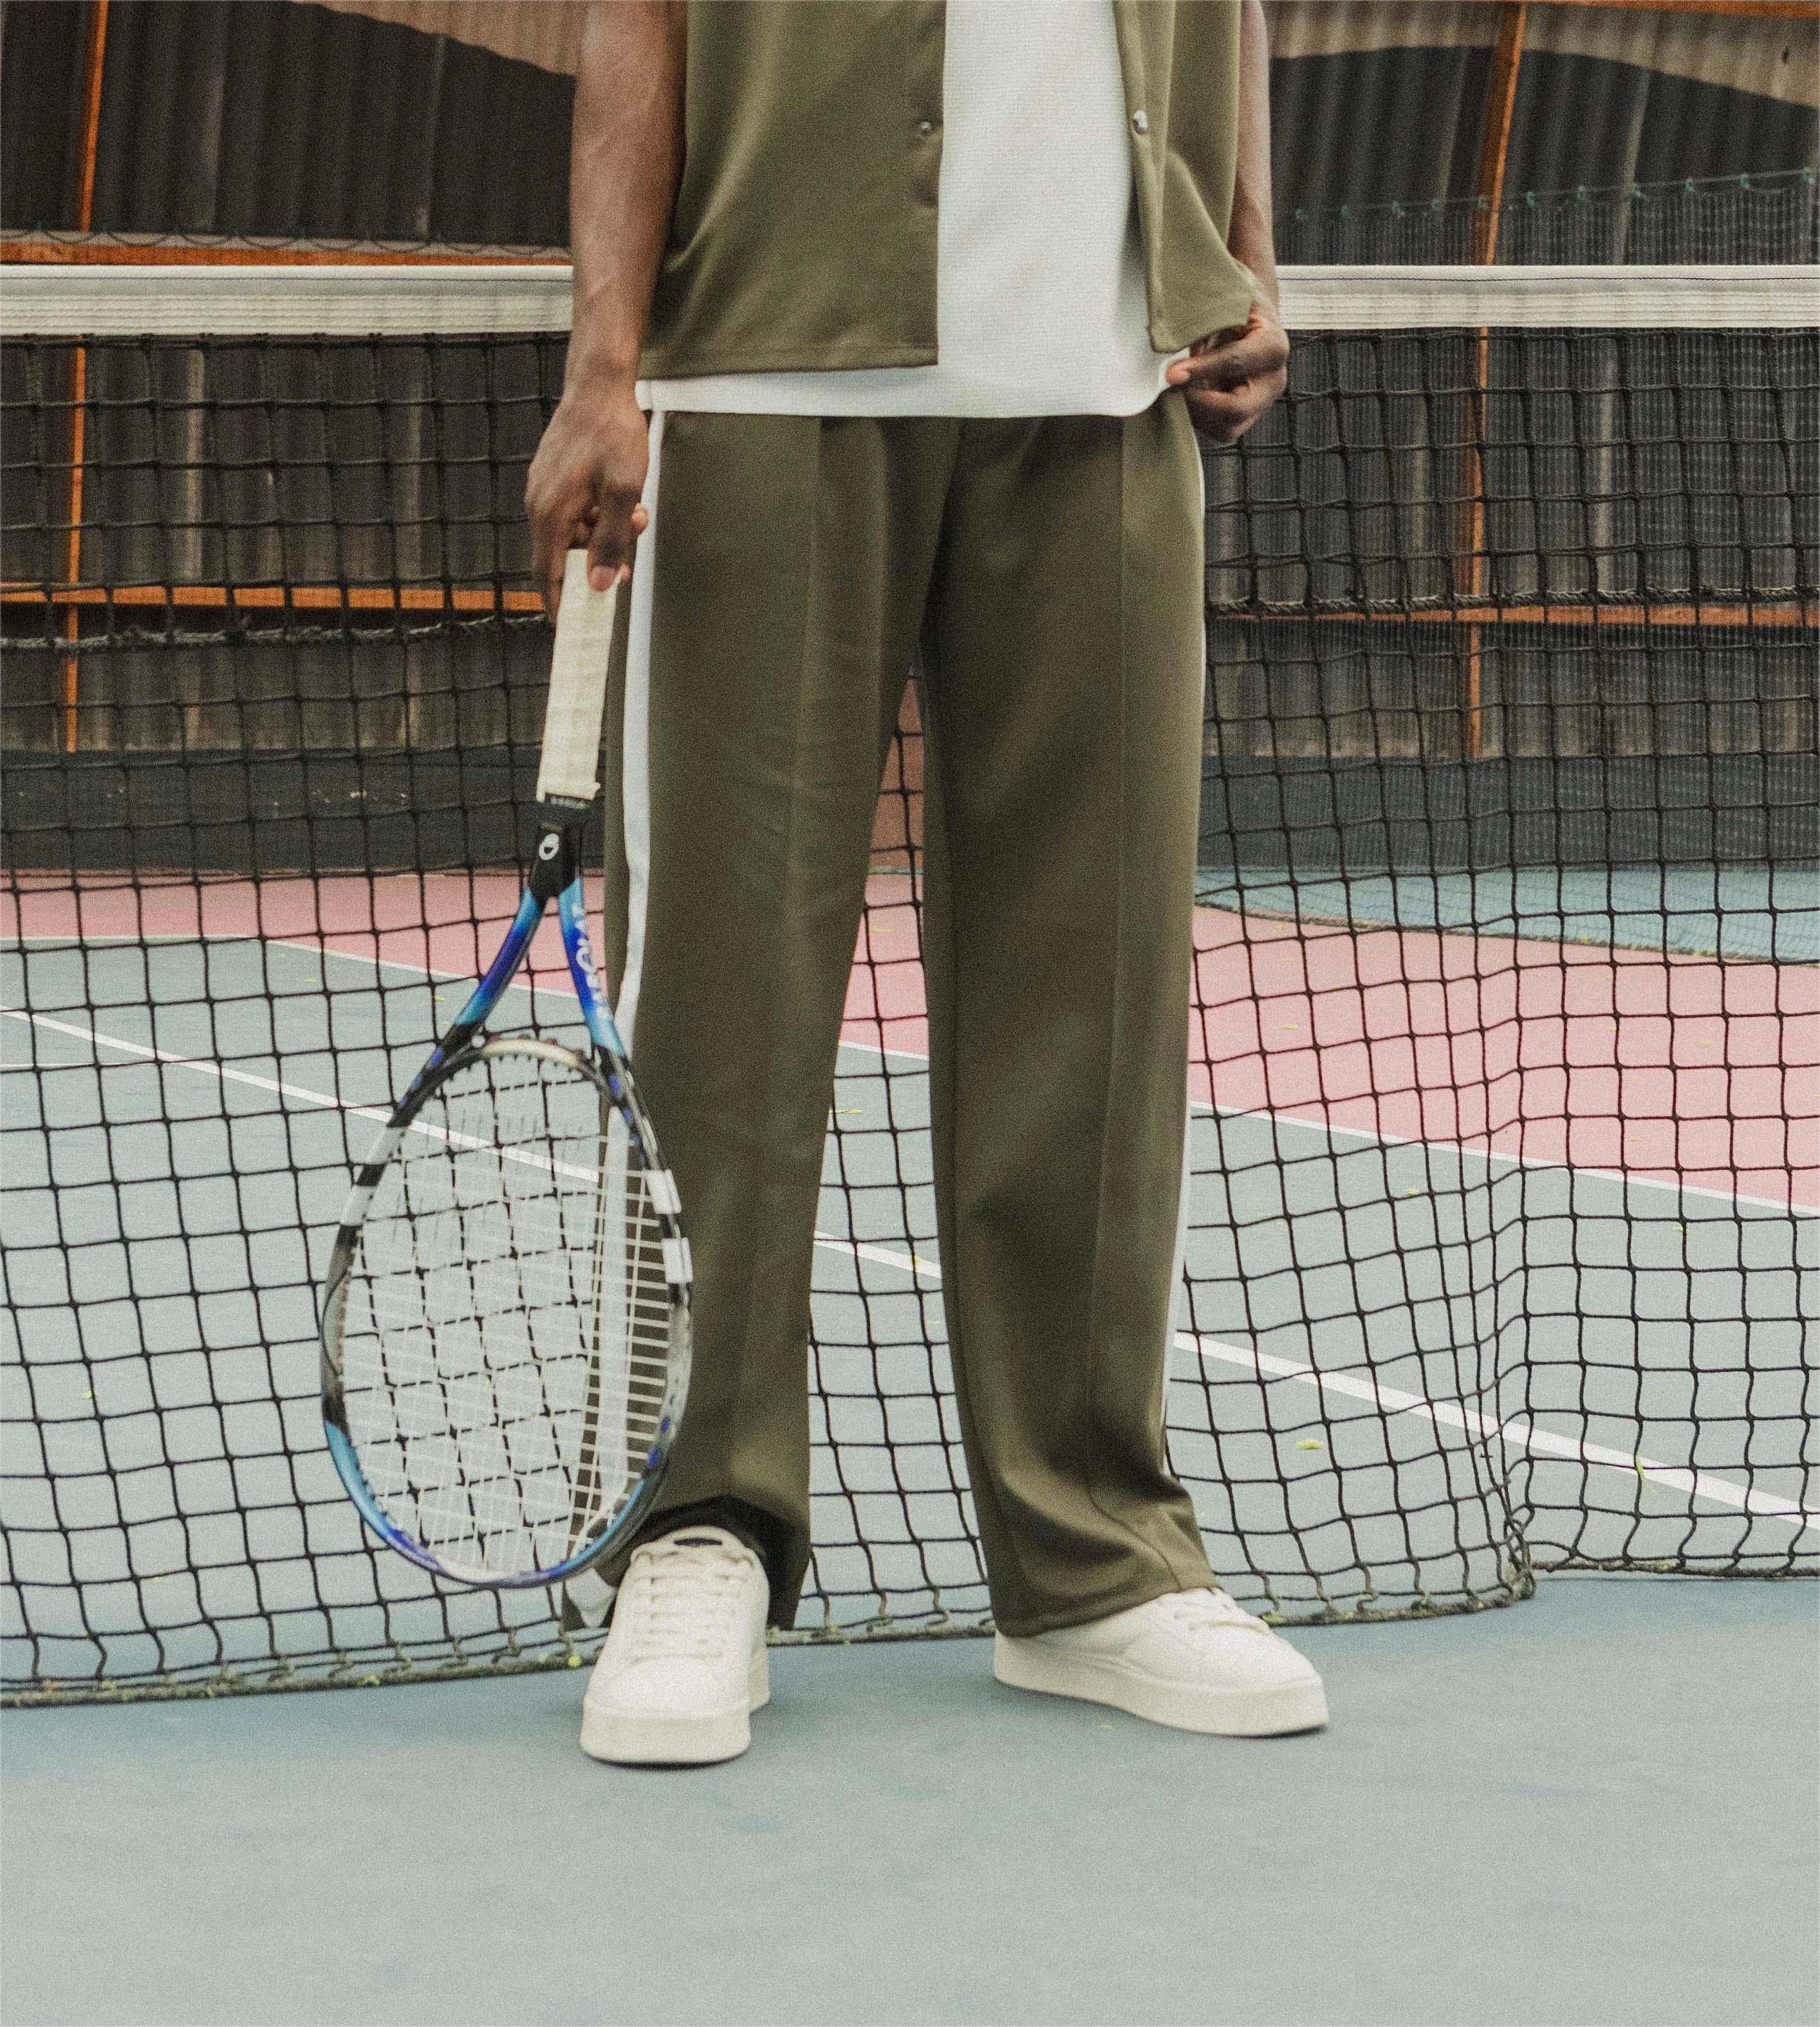 Wide jogging pants with bands along the legs